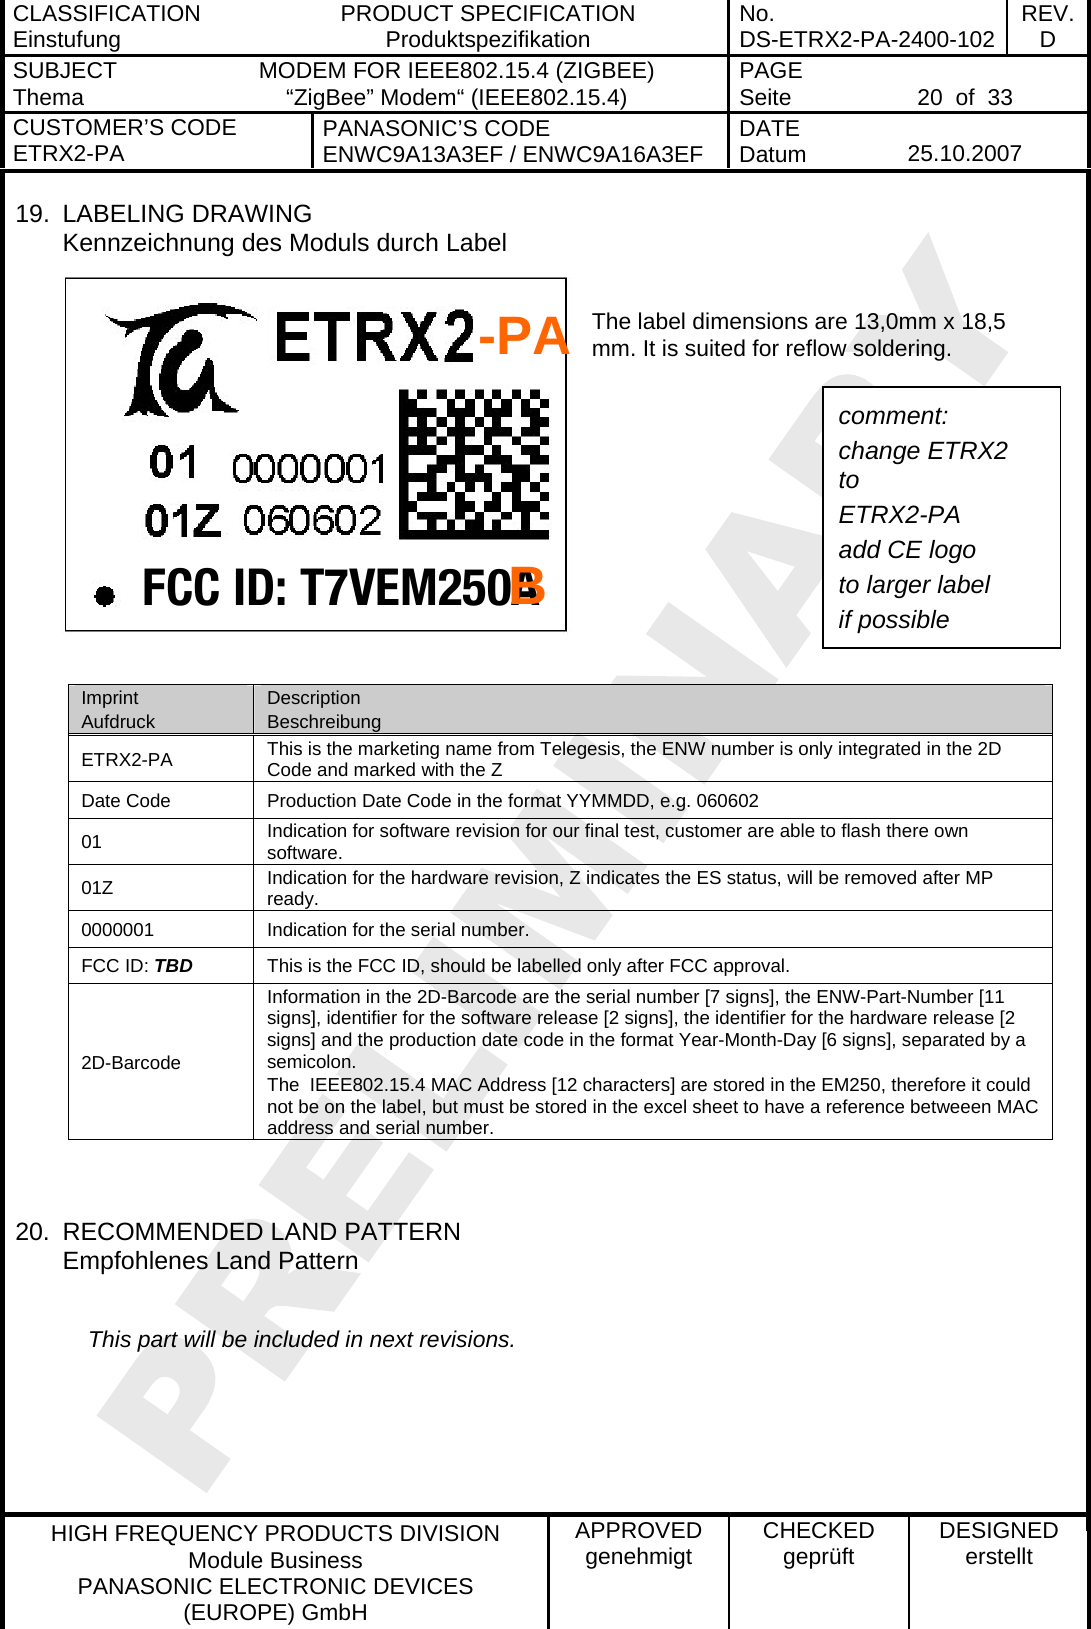 CLASSIFICATION Einstufung  PRODUCT SPECIFICATION Produktspezifikation  No. DS-ETRX2-PA-2400-102 REV.D SUBJECT Thema  MODEM FOR IEEE802.15.4 (ZIGBEE) “ZigBee” Modem“ (IEEE802.15.4)    PAGE Seite   20  of  33 CUSTOMER’S CODE ETRX2-PA  PANASONIC’S CODE ENWC9A13A3EF / ENWC9A16A3EF  DATE Datum   25.10.2007   HIGH FREQUENCY PRODUCTS DIVISION Module Business PANASONIC ELECTRONIC DEVICES  (EUROPE) GmbH APPROVED genehmigt  CHECKED geprüft  DESIGNED erstellt FCC ID: T7VEM250A19. LABELING DRAWING Kennzeichnung des Moduls durch Label  The label dimensions are 13,0mm x 18,5 mm. It is suited for reflow soldering.         -PA comment: change ETRX2 to ETRX2-PA add CE logo to larger label if possible B Imprint Aufdruck Description Beschreibung ETRX2-PA  This is the marketing name from Telegesis, the ENW number is only integrated in the 2D Code and marked with the Z Date Code  Production Date Code in the format YYMMDD, e.g. 060602 01  Indication for software revision for our final test, customer are able to flash there own software. 01Z  Indication for the hardware revision, Z indicates the ES status, will be removed after MP ready. 0000001  Indication for the serial number. FCC ID: TBD  This is the FCC ID, should be labelled only after FCC approval. 2D-Barcode Information in the 2D-Barcode are the serial number [7 signs], the ENW-Part-Number [11 signs], identifier for the software release [2 signs], the identifier for the hardware release [2 signs] and the production date code in the format Year-Month-Day [6 signs], separated by a semicolon. The  IEEE802.15.4 MAC Address [12 characters] are stored in the EM250, therefore it could not be on the label, but must be stored in the excel sheet to have a reference betweeen MAC address and serial number.   20.  RECOMMENDED LAND PATTERN Empfohlenes Land Pattern       This part will be included in next revisions.  